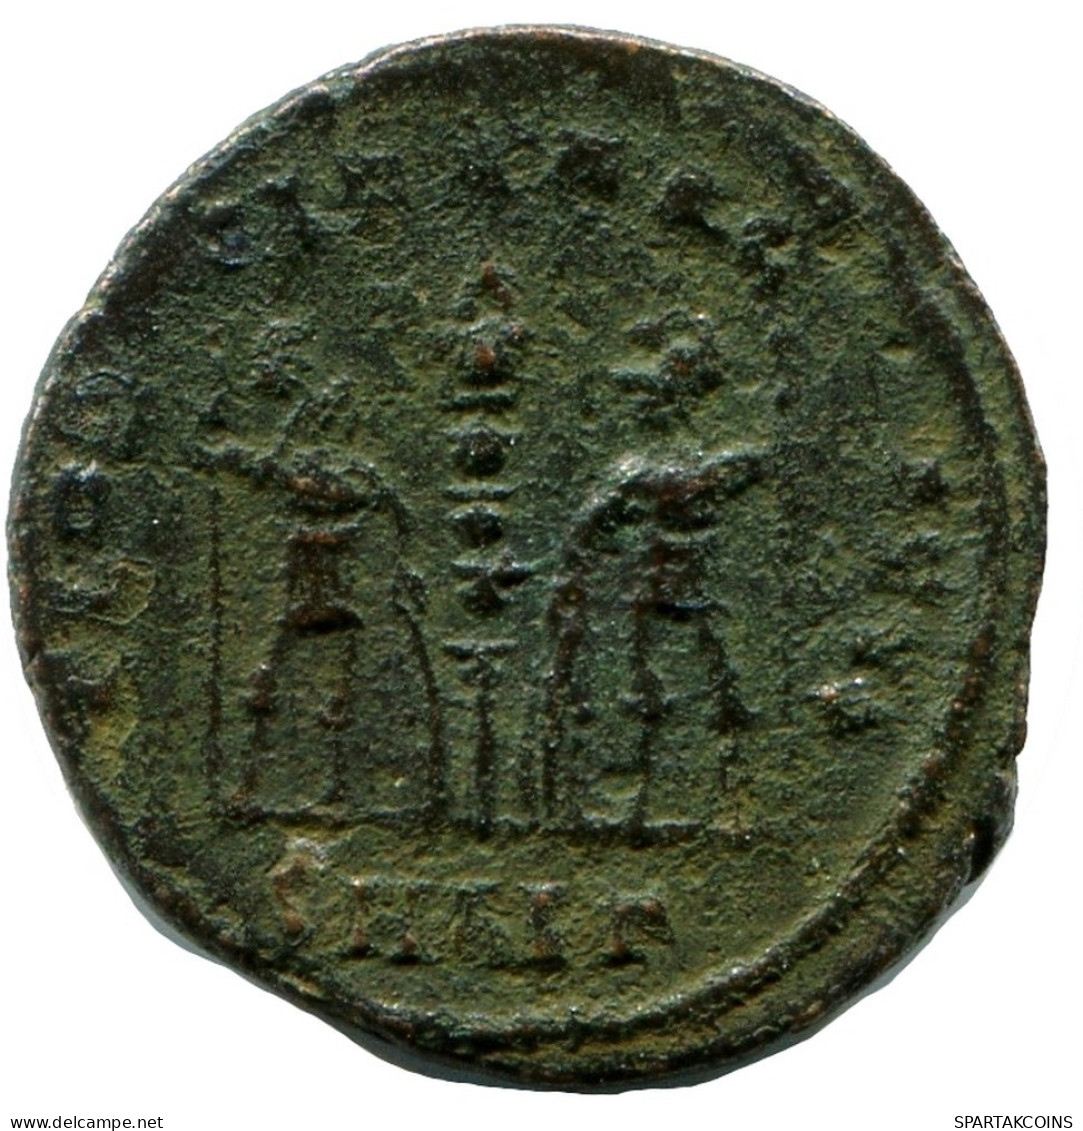 CONSTANS MINTED IN ALEKSANDRIA FROM THE ROYAL ONTARIO MUSEUM #ANC11363.14.U.A - El Imperio Christiano (307 / 363)